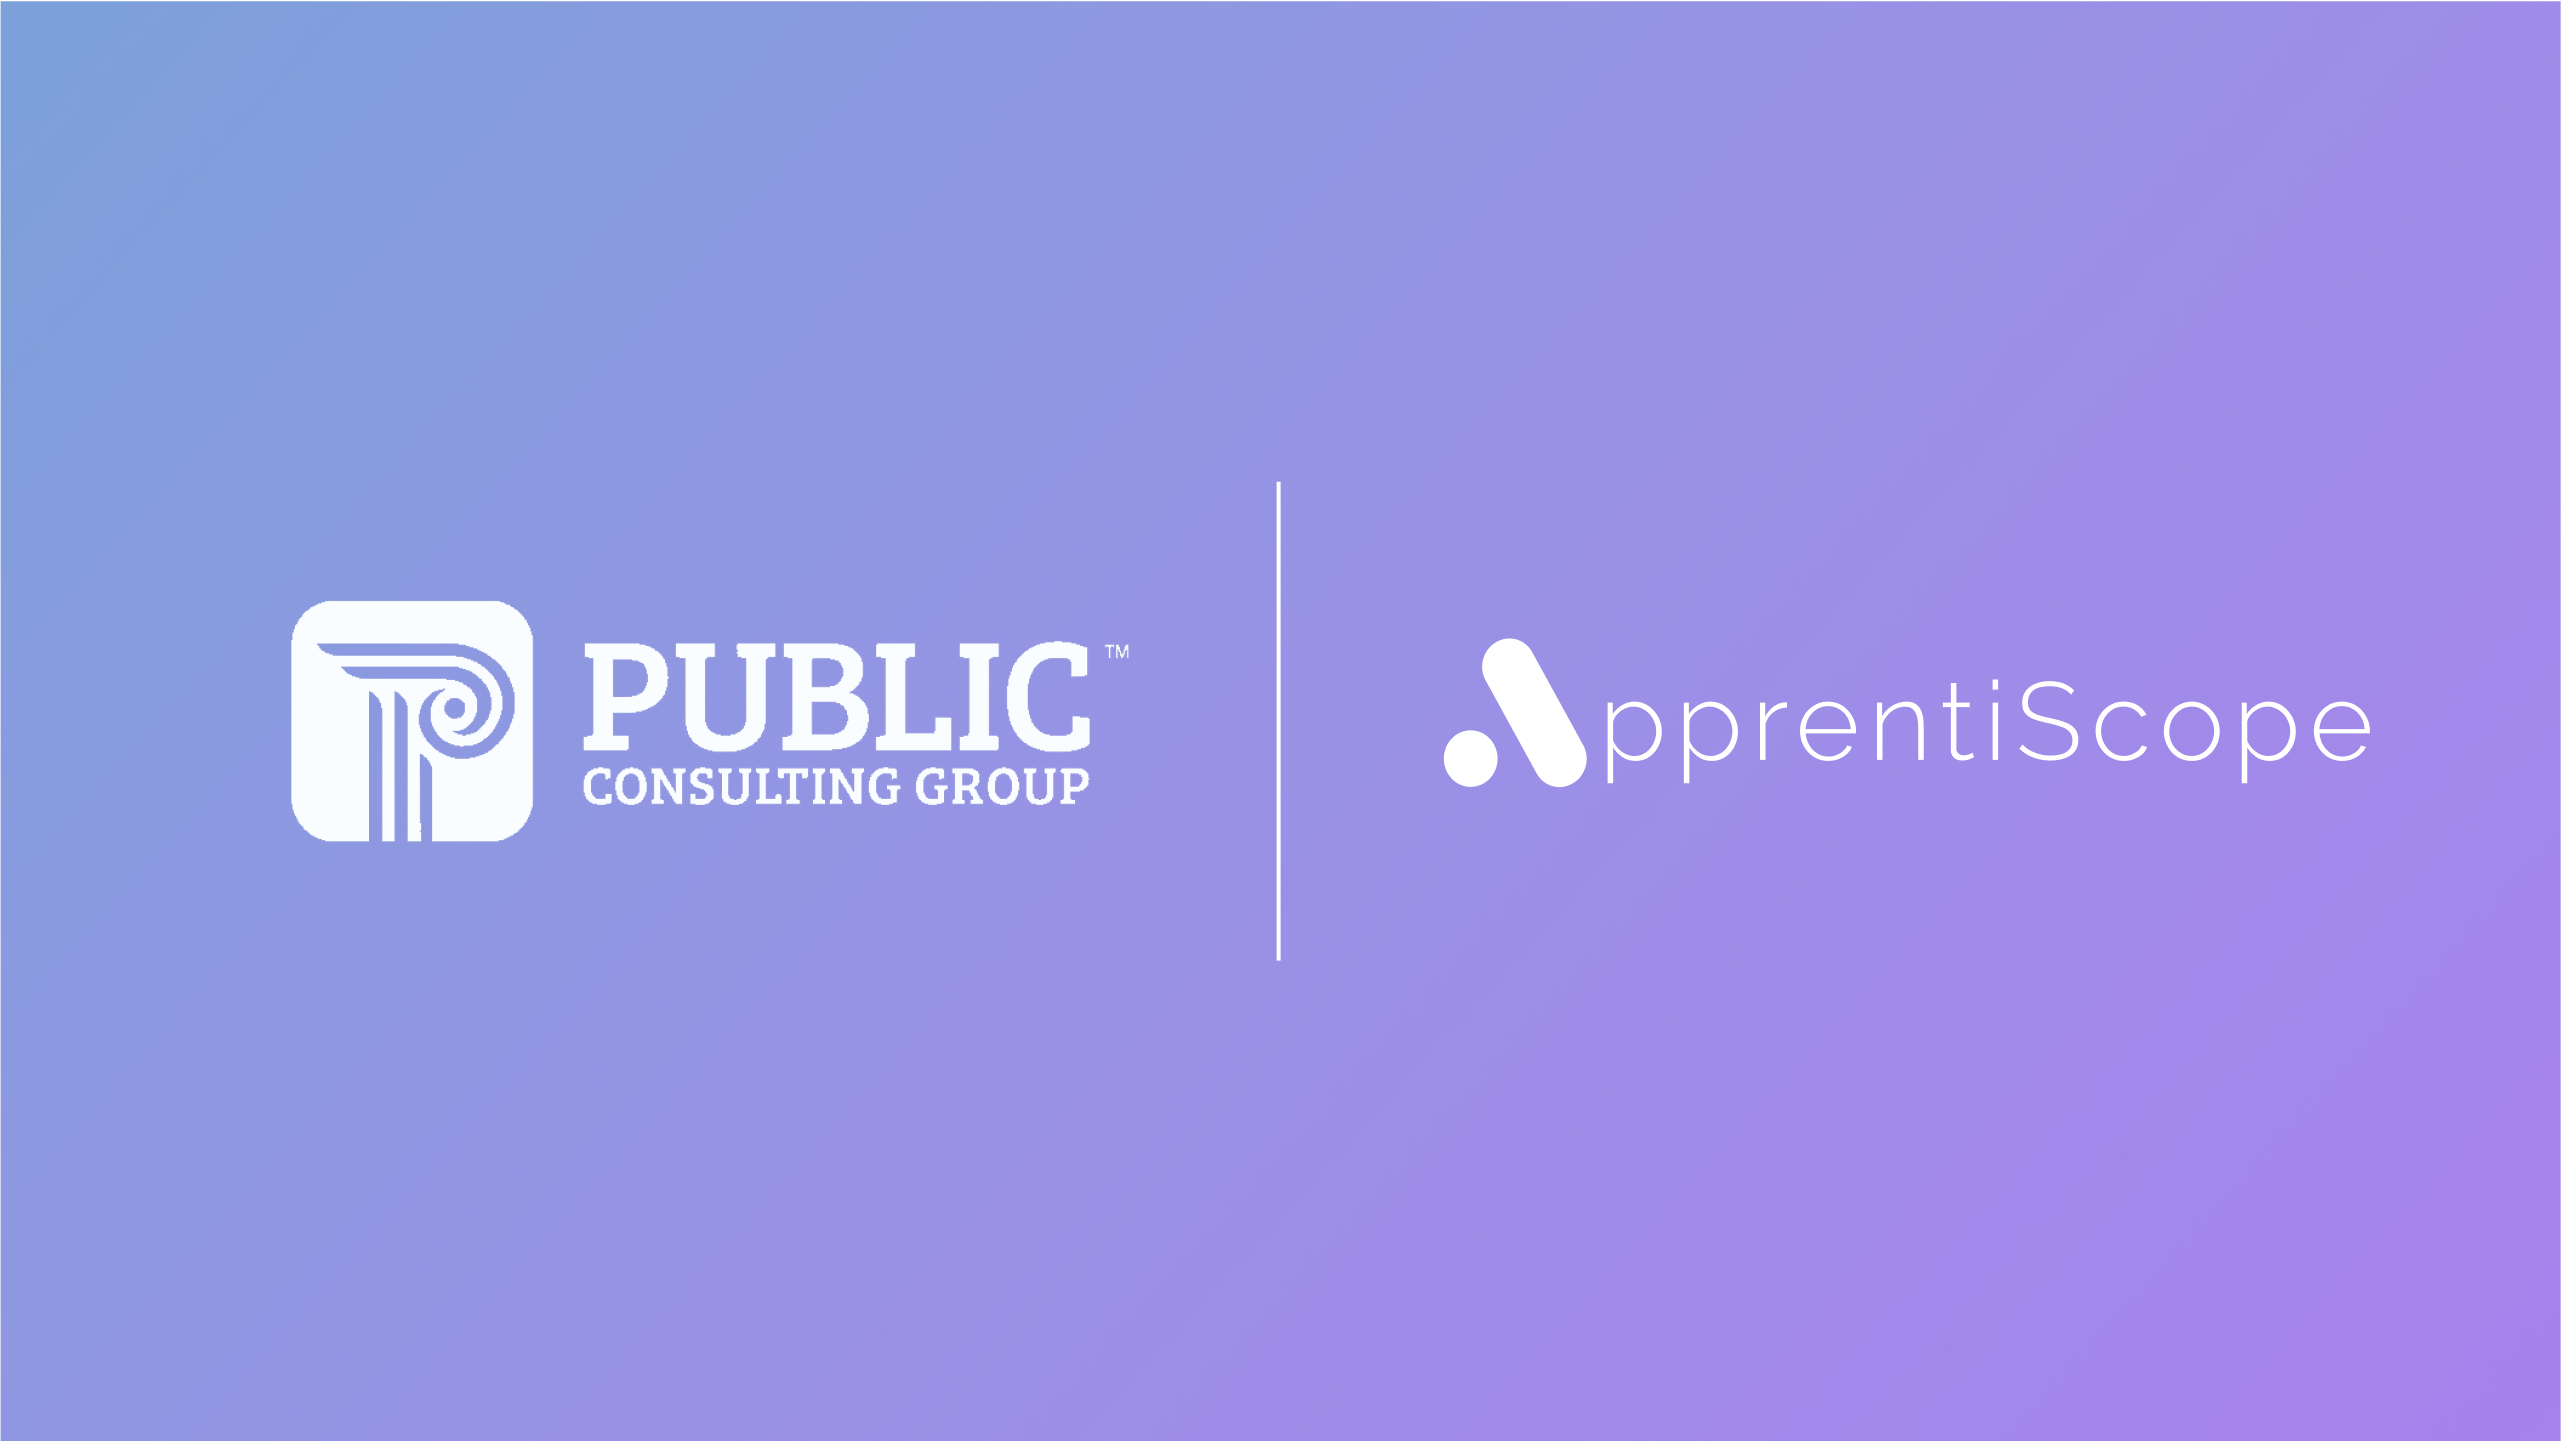 Public Consulting Group Partners with ApprentiScope to Launch National Management Service for Apprenticeship Sponsors